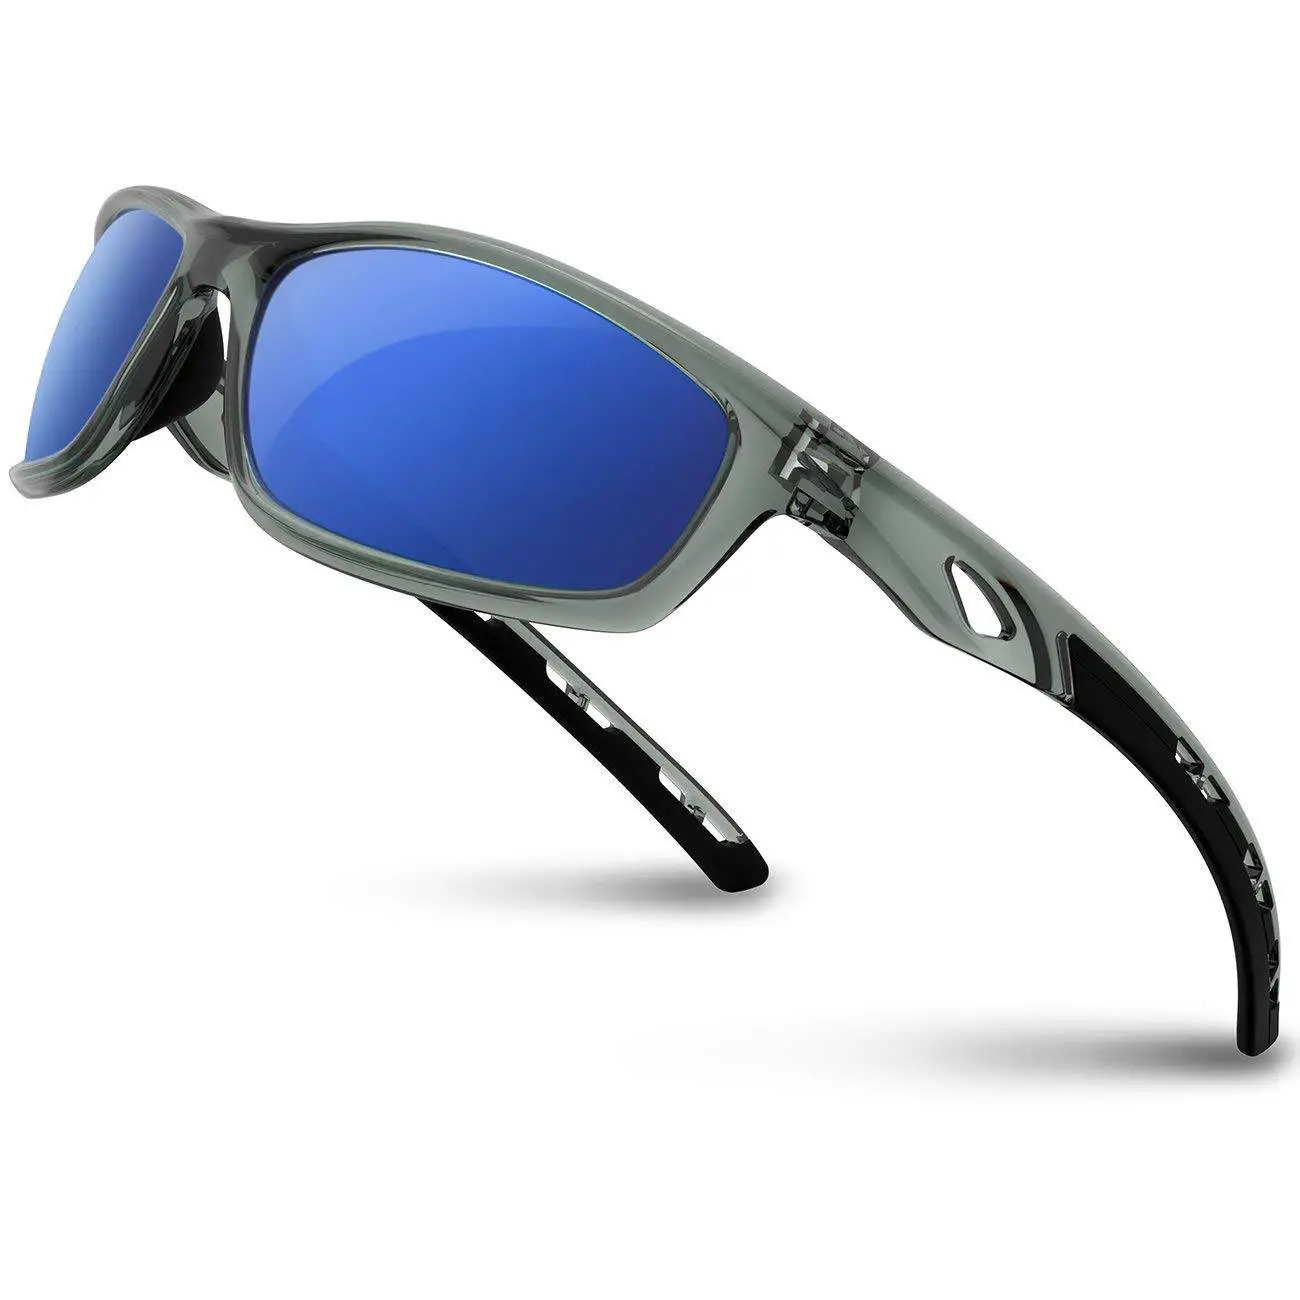 RIVBOS Polarized Sports Sunglasses – TR90 Unbreakable Frame